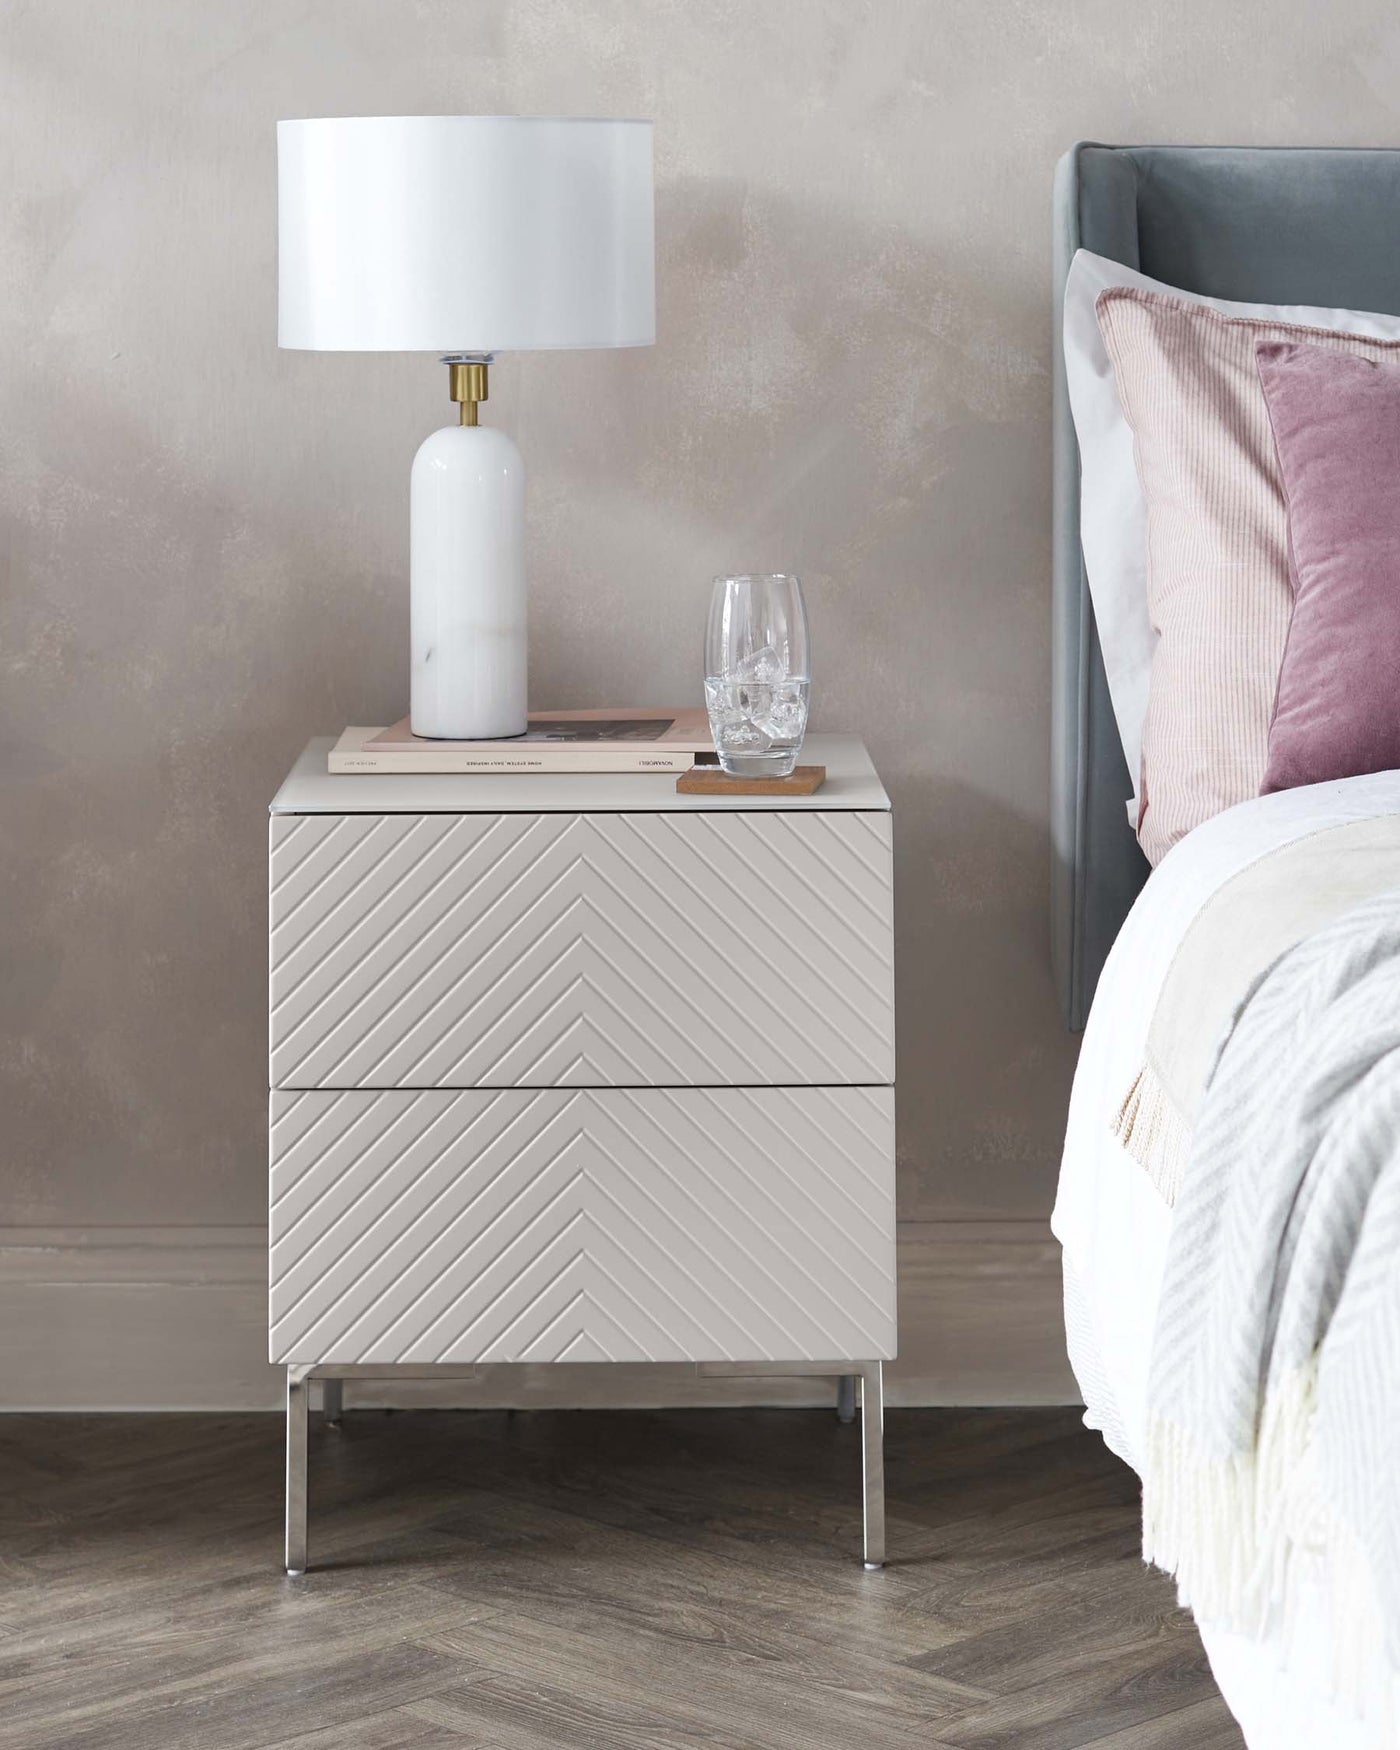 Modern bedside table with chevron design in a light wood finish, featuring a single drawer with a sleek black handle and metal legs.